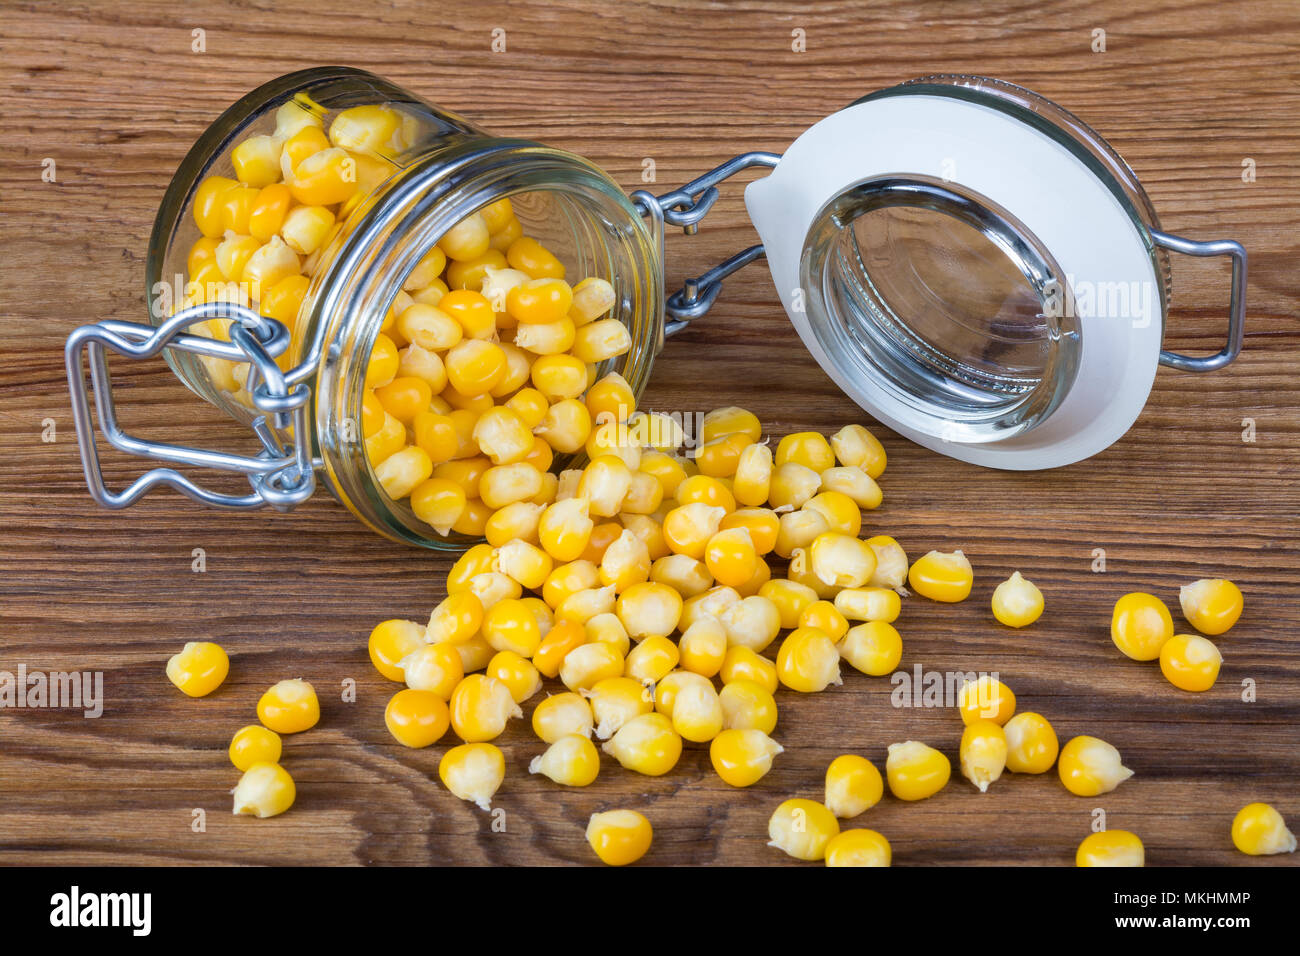 Boiled corn grains spilled on a wood background. Tasty and healthy vegetarian snack from yellow maize in a lying glass jar. Stock Photo